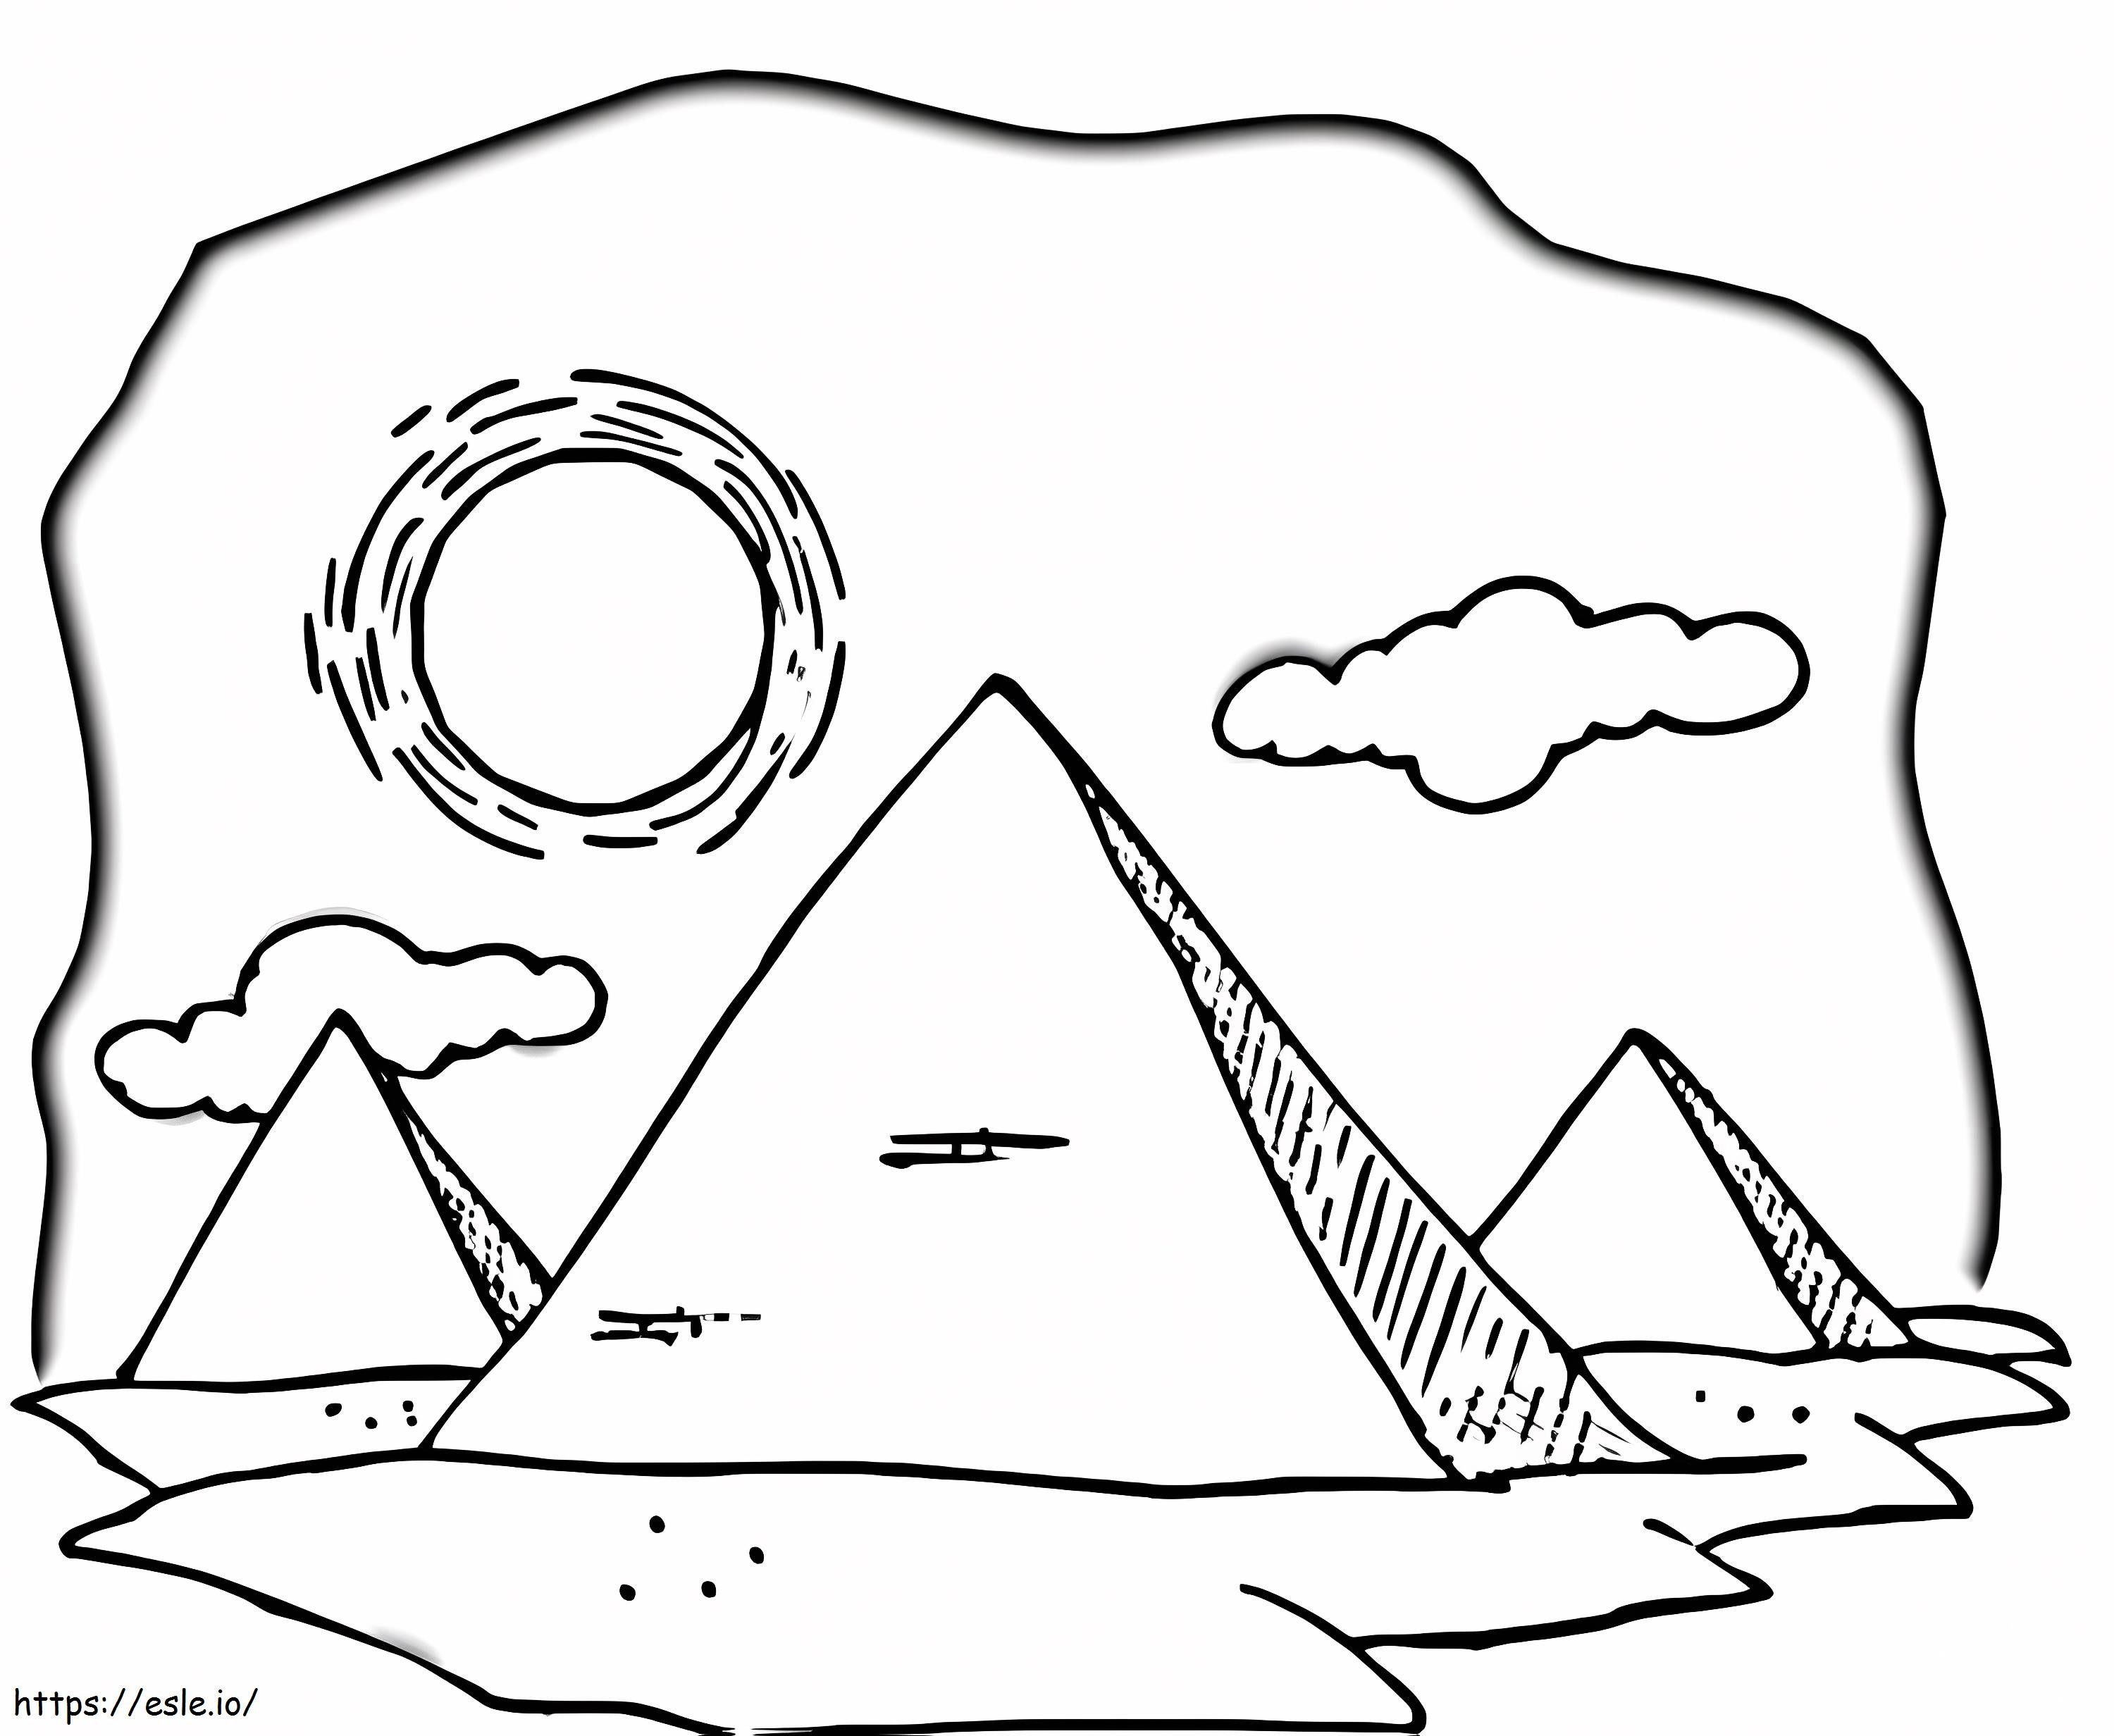 Hot Egyptian Desert coloring page